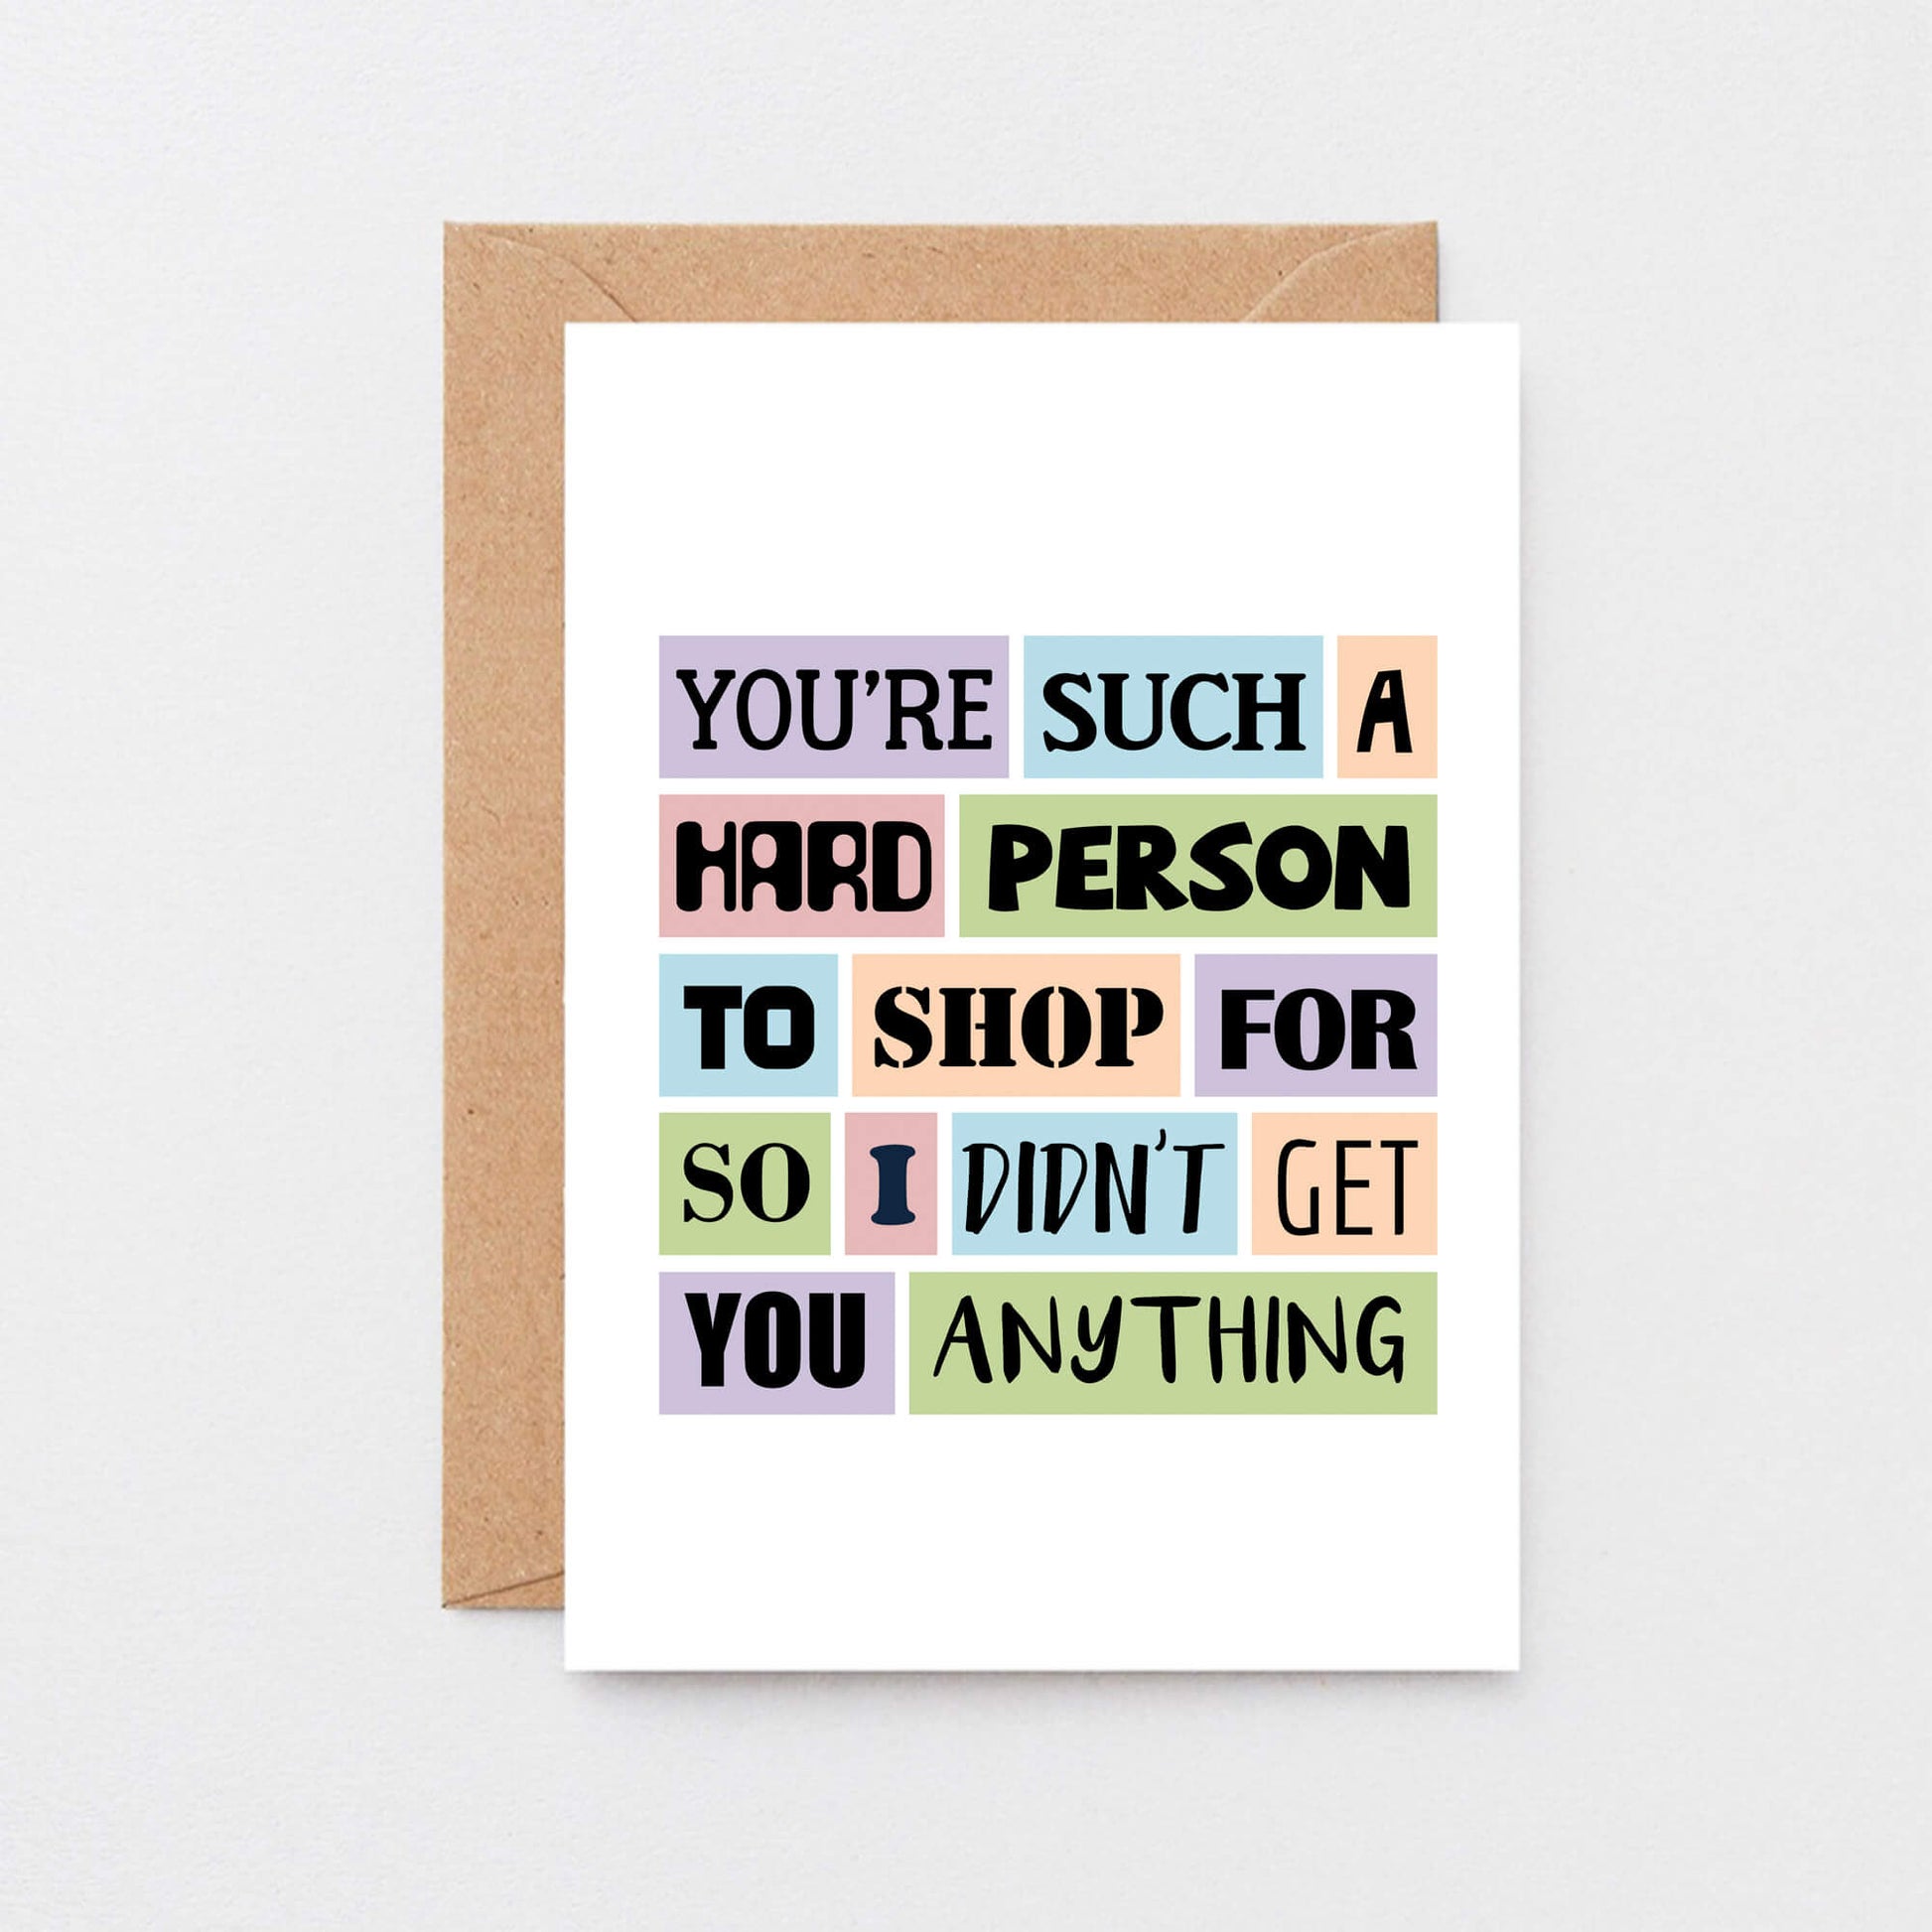 Funny Birthday Card by SixElevenCreations. Reads You're such a hard person to shop for so I didn't get you anything. Product Code SE0026A6